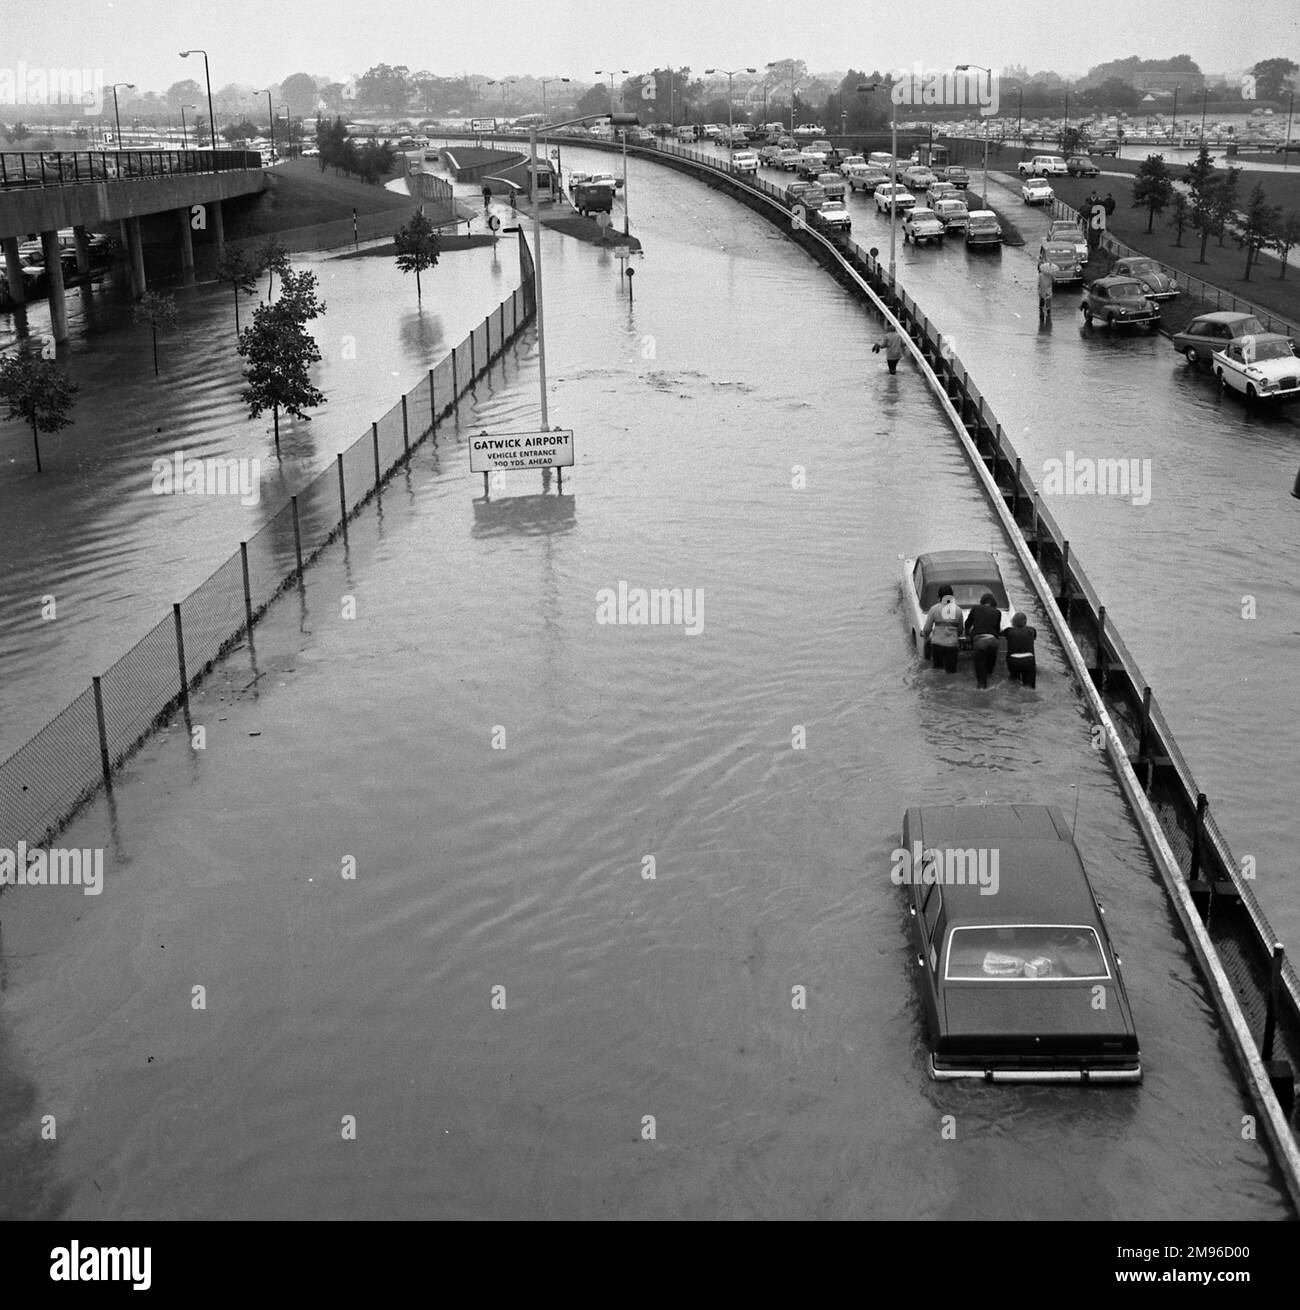 A scene of freak flooding at Gatwick Airport, West Sussex, with cars partially submerged in the water. Stock Photo